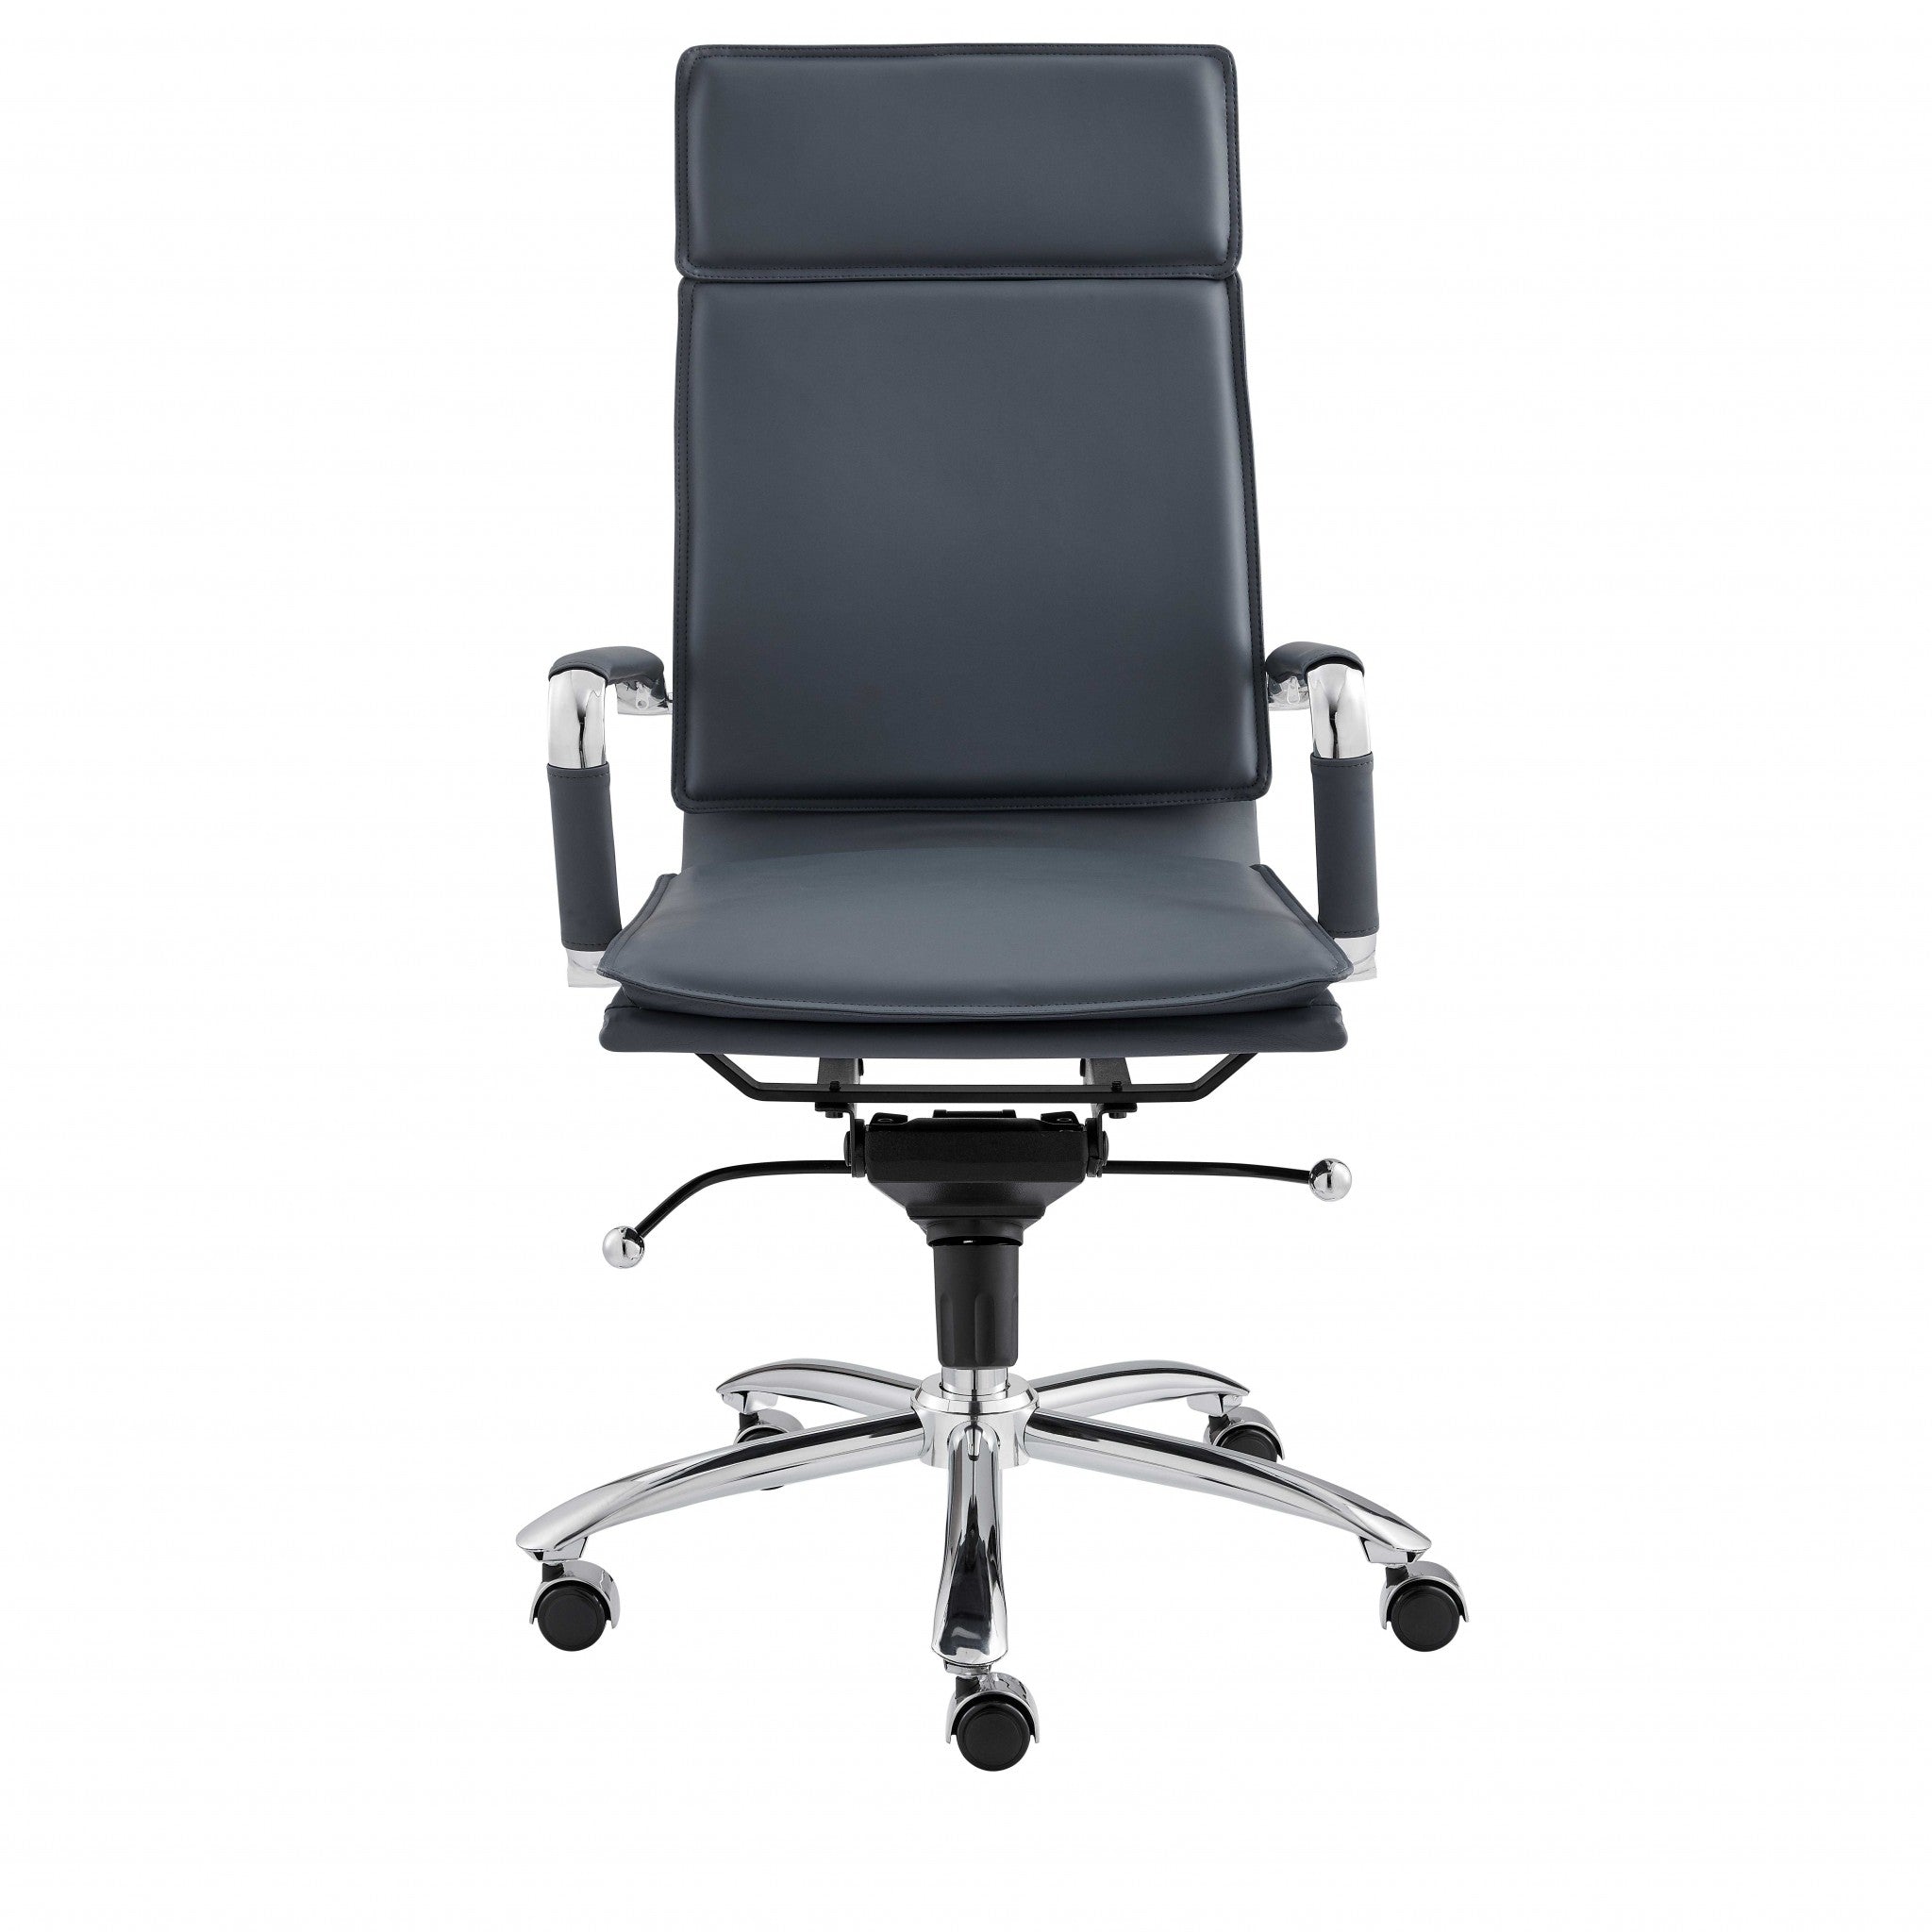 Blue-Faux-Leather-Seat-Swivel-Adjustable-Task-Chair-Leather-Back-Steel-Frame-Office-Chairs